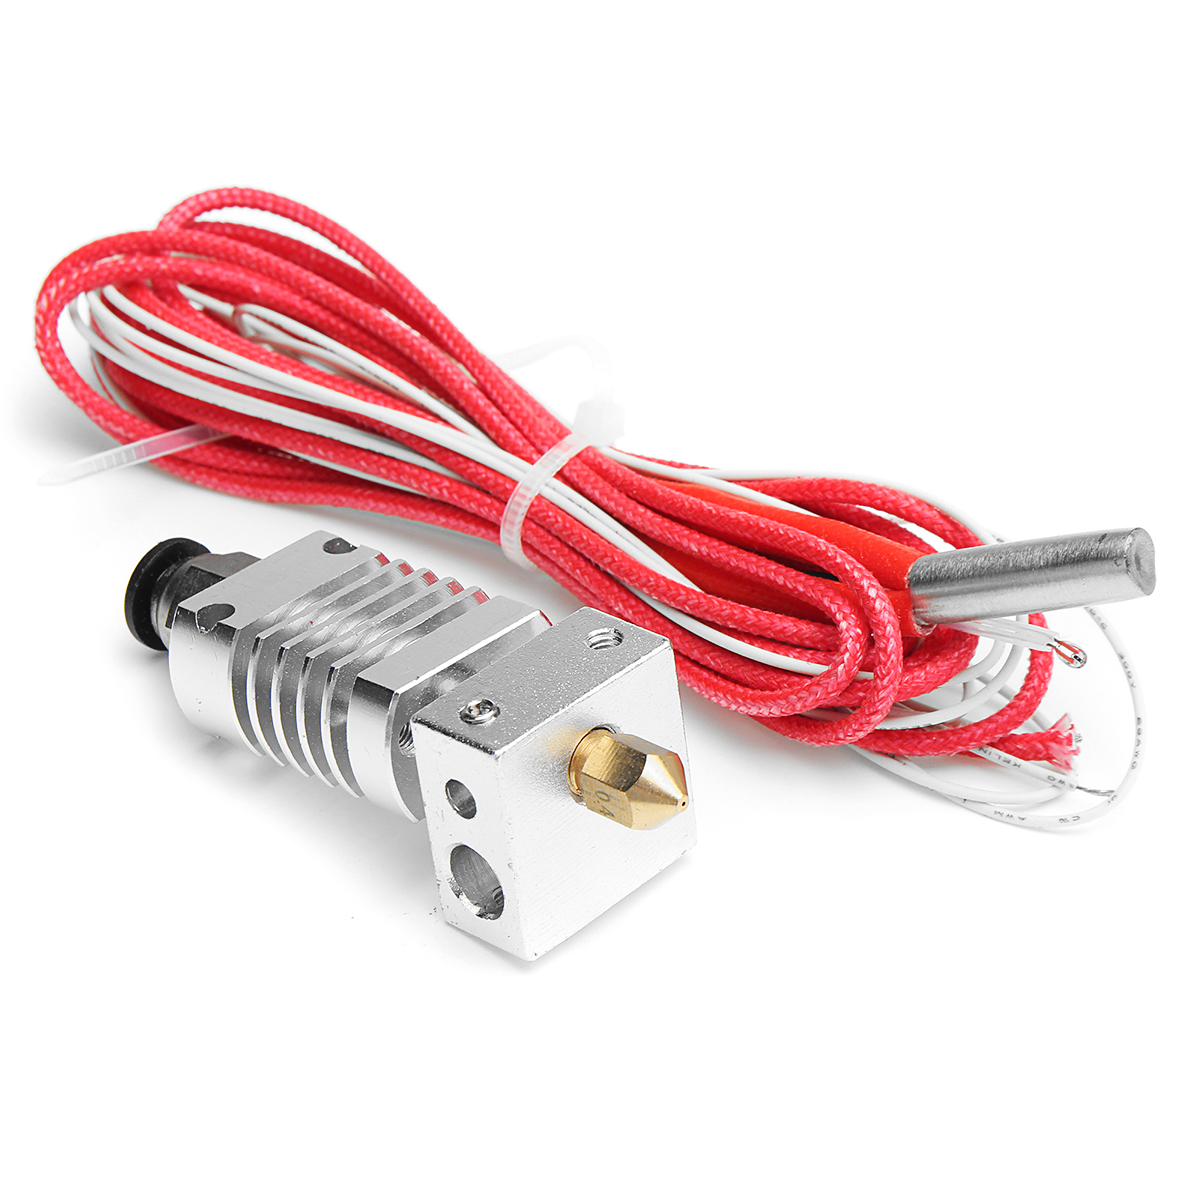 V6 1.75mm All Metal J-Head Hotend Remote Extruder Kit with Heating tube for CR10 3D Printer 20